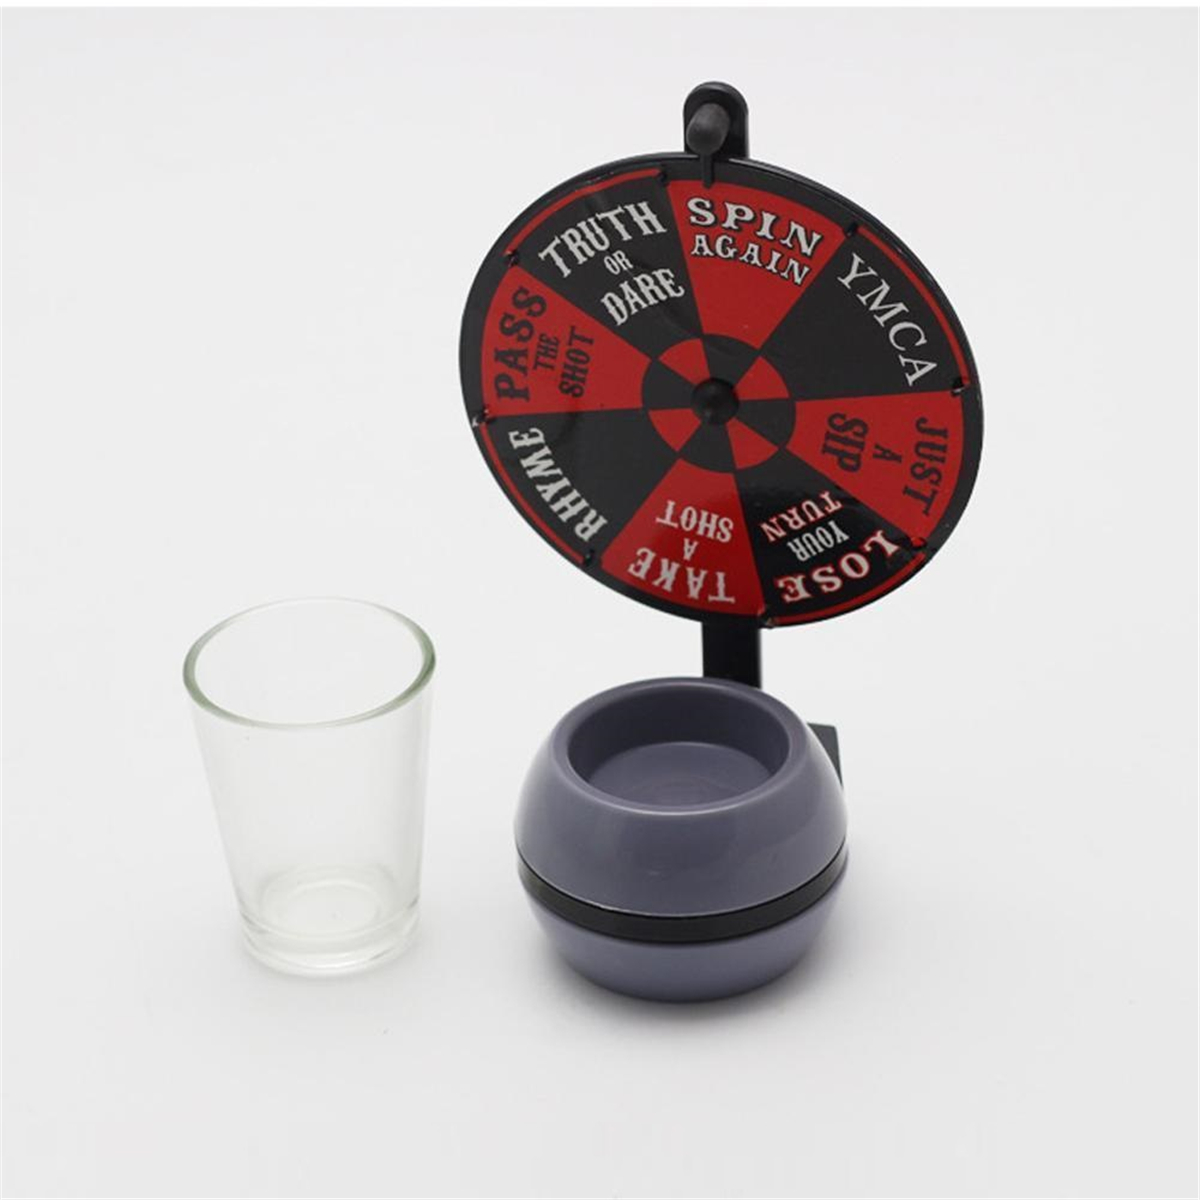 Spinner-Spin-The-Shot-Turntable-Glass-Alcohol-Drinking-Game-Roulette-Board-Game-Toy-Party-1395243